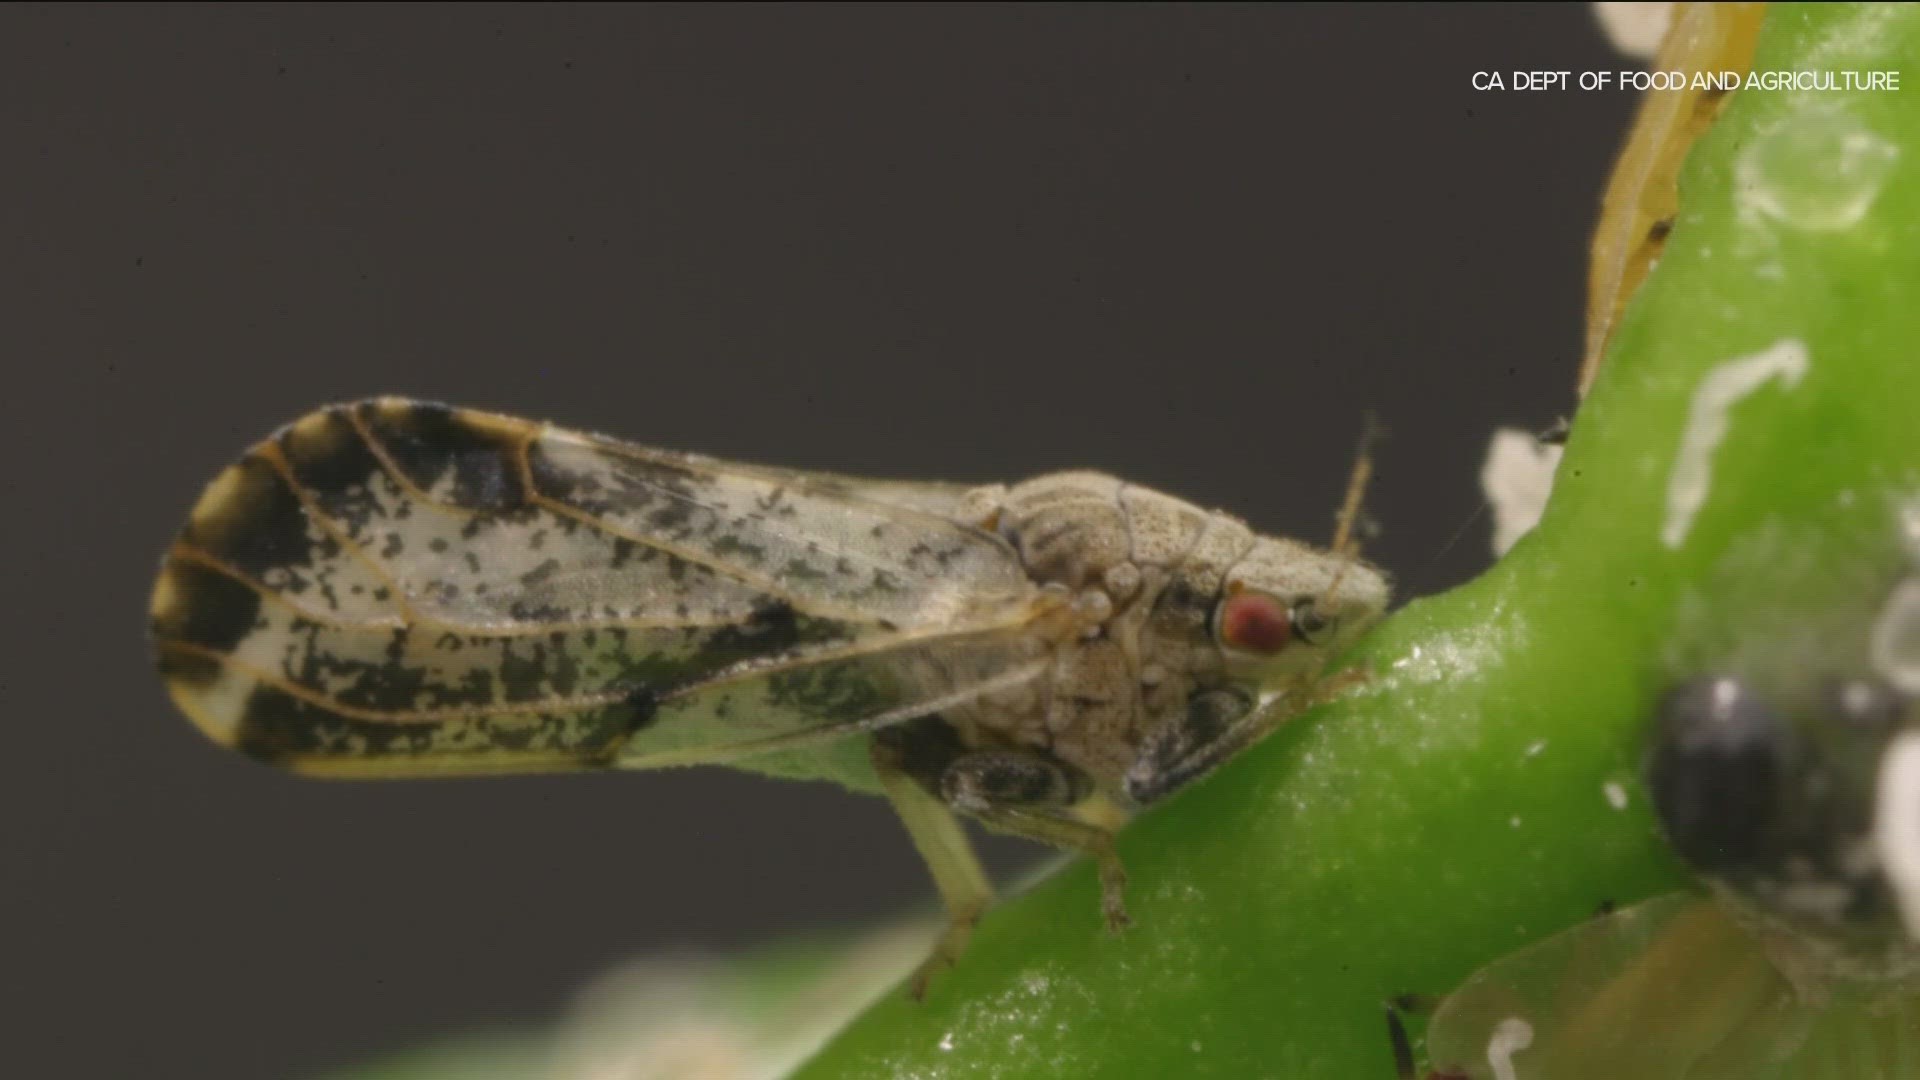 The Asian citrus psyllid is a sap-sucking bug that can spread a bacterial infection to citrus plants.